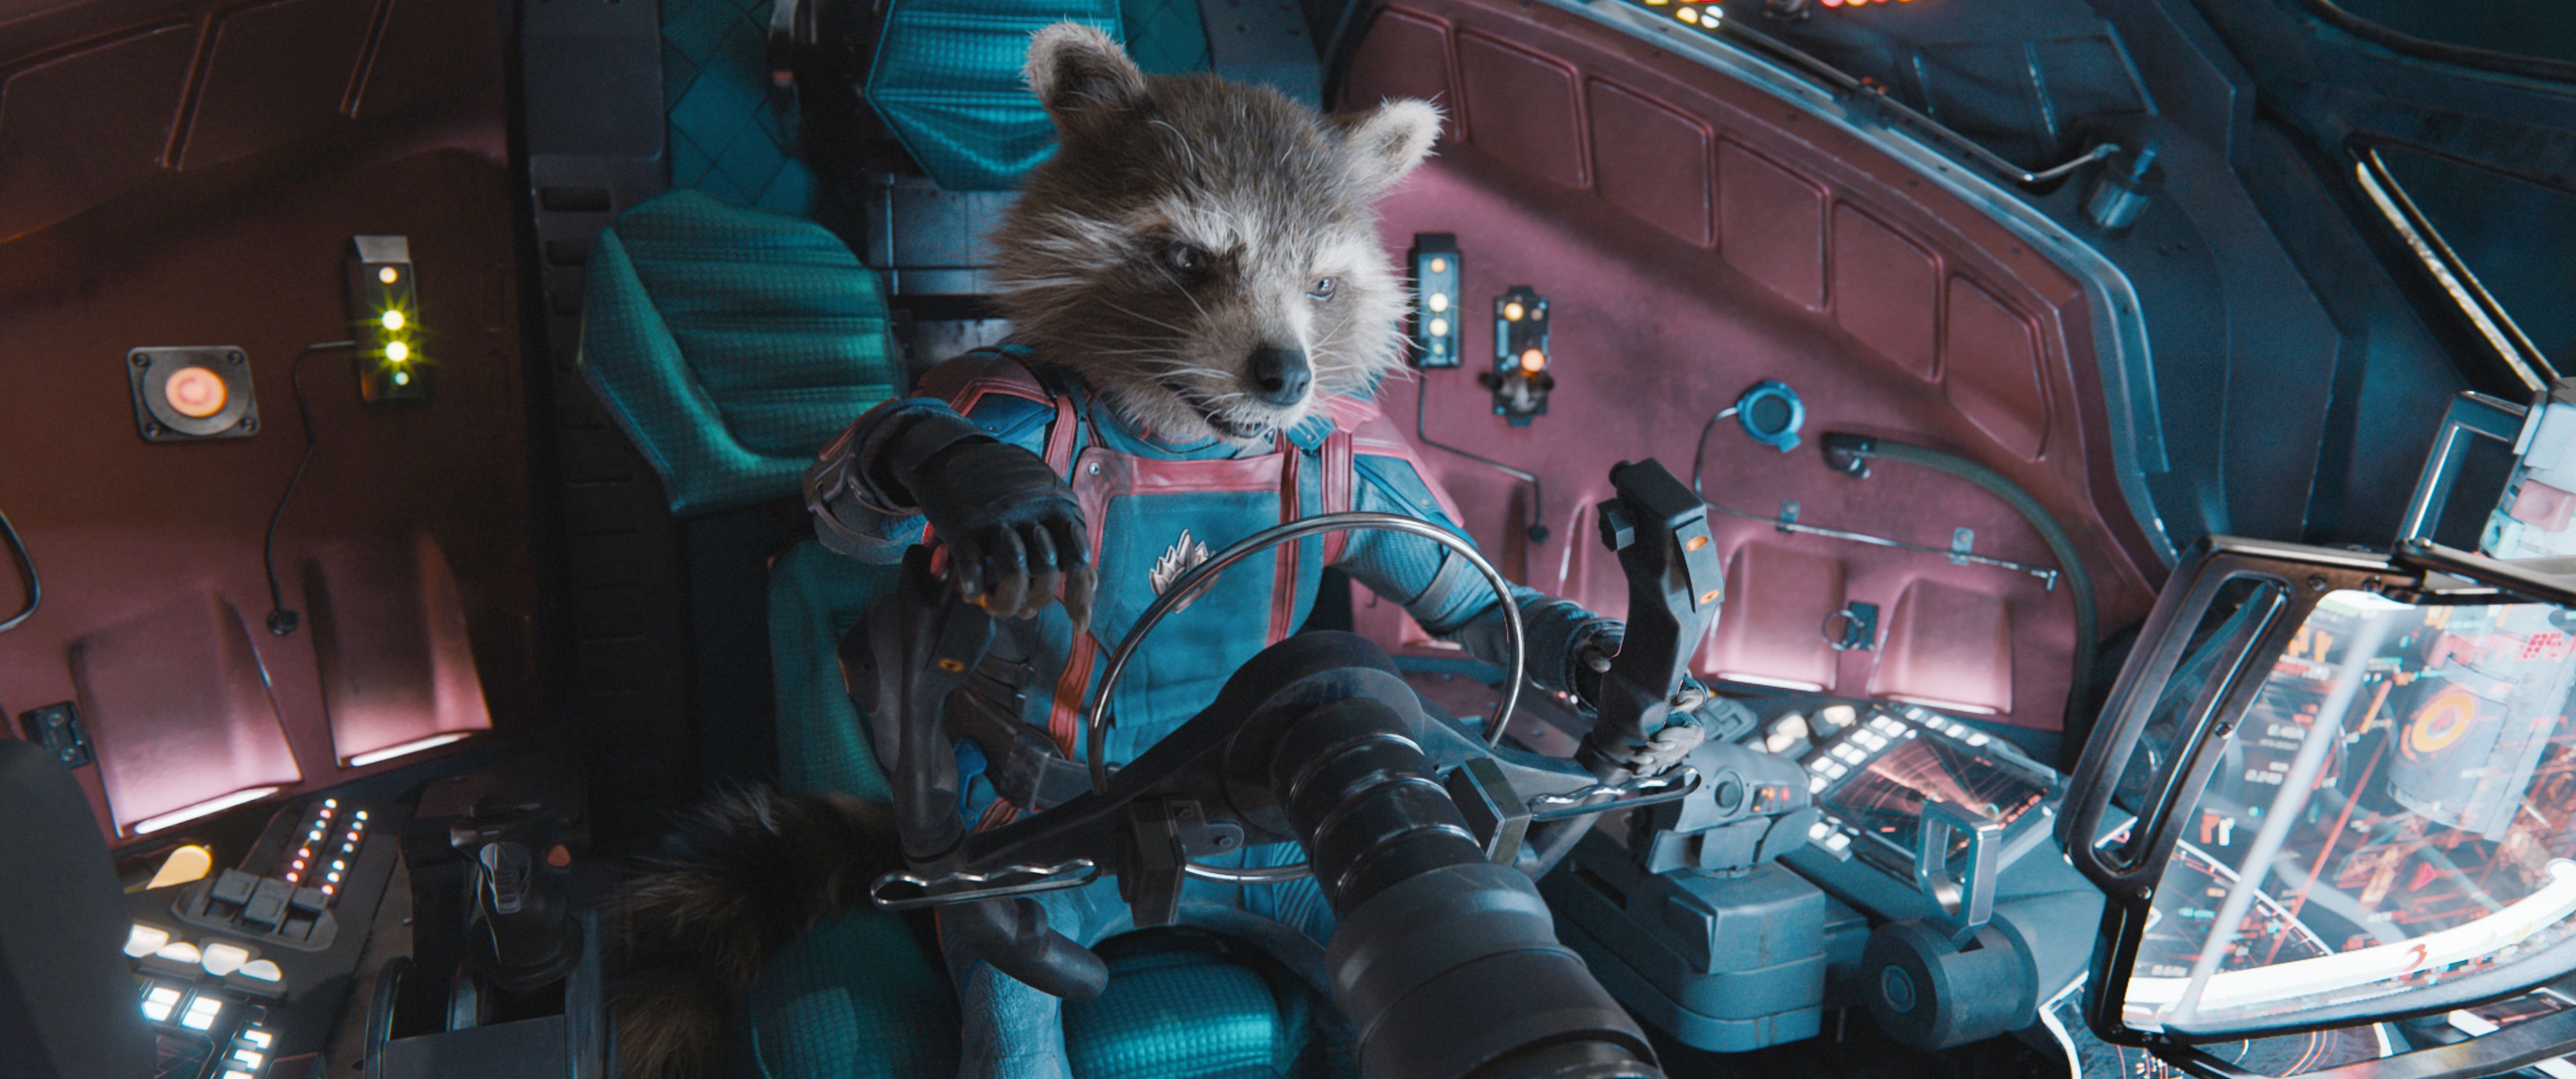 Movie review: 'Guardians of the Galaxy Vol. 3' ends trilogy satisfactorily